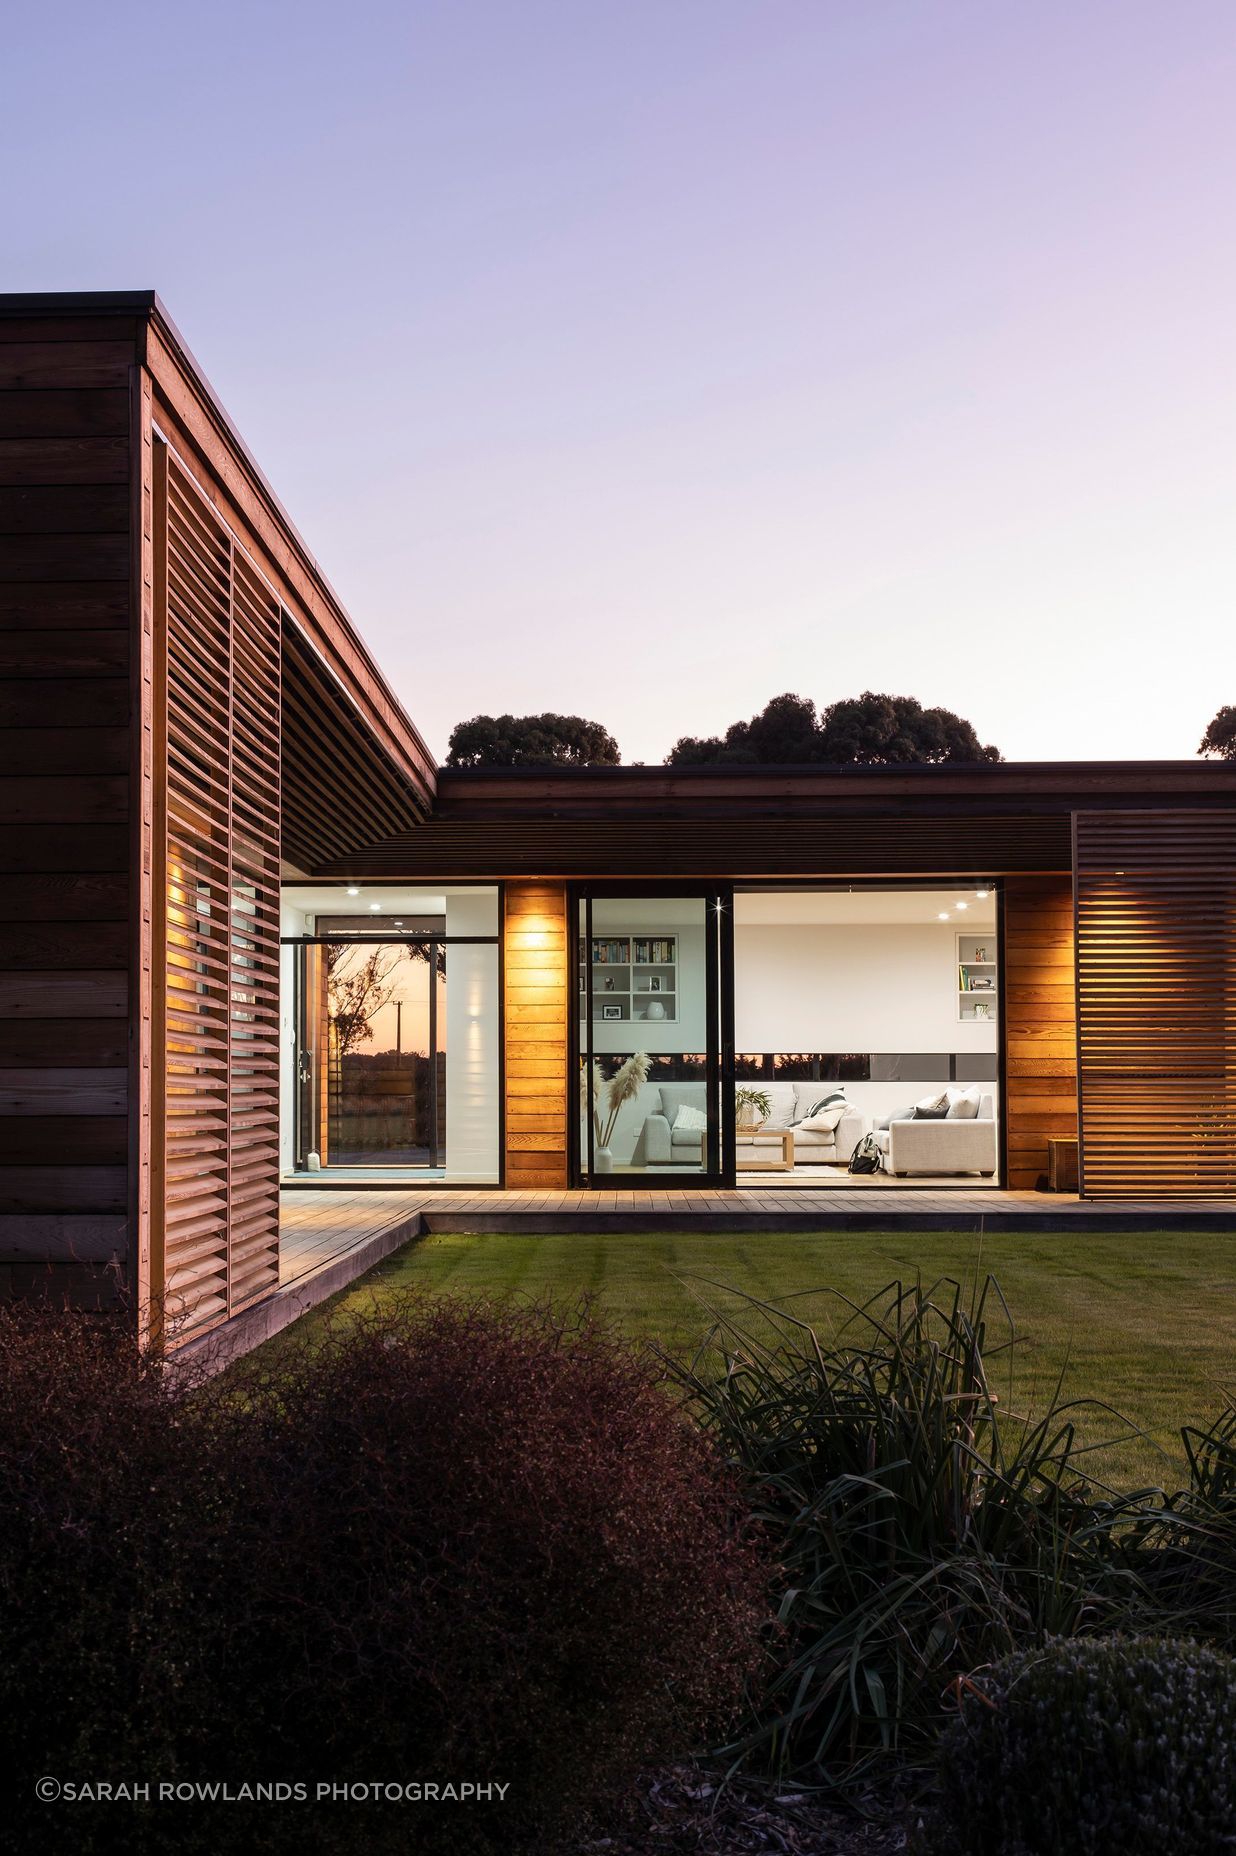 The living area seen from the lawn. Oiled cedar cladding adds warmth to the clean composition of the form.